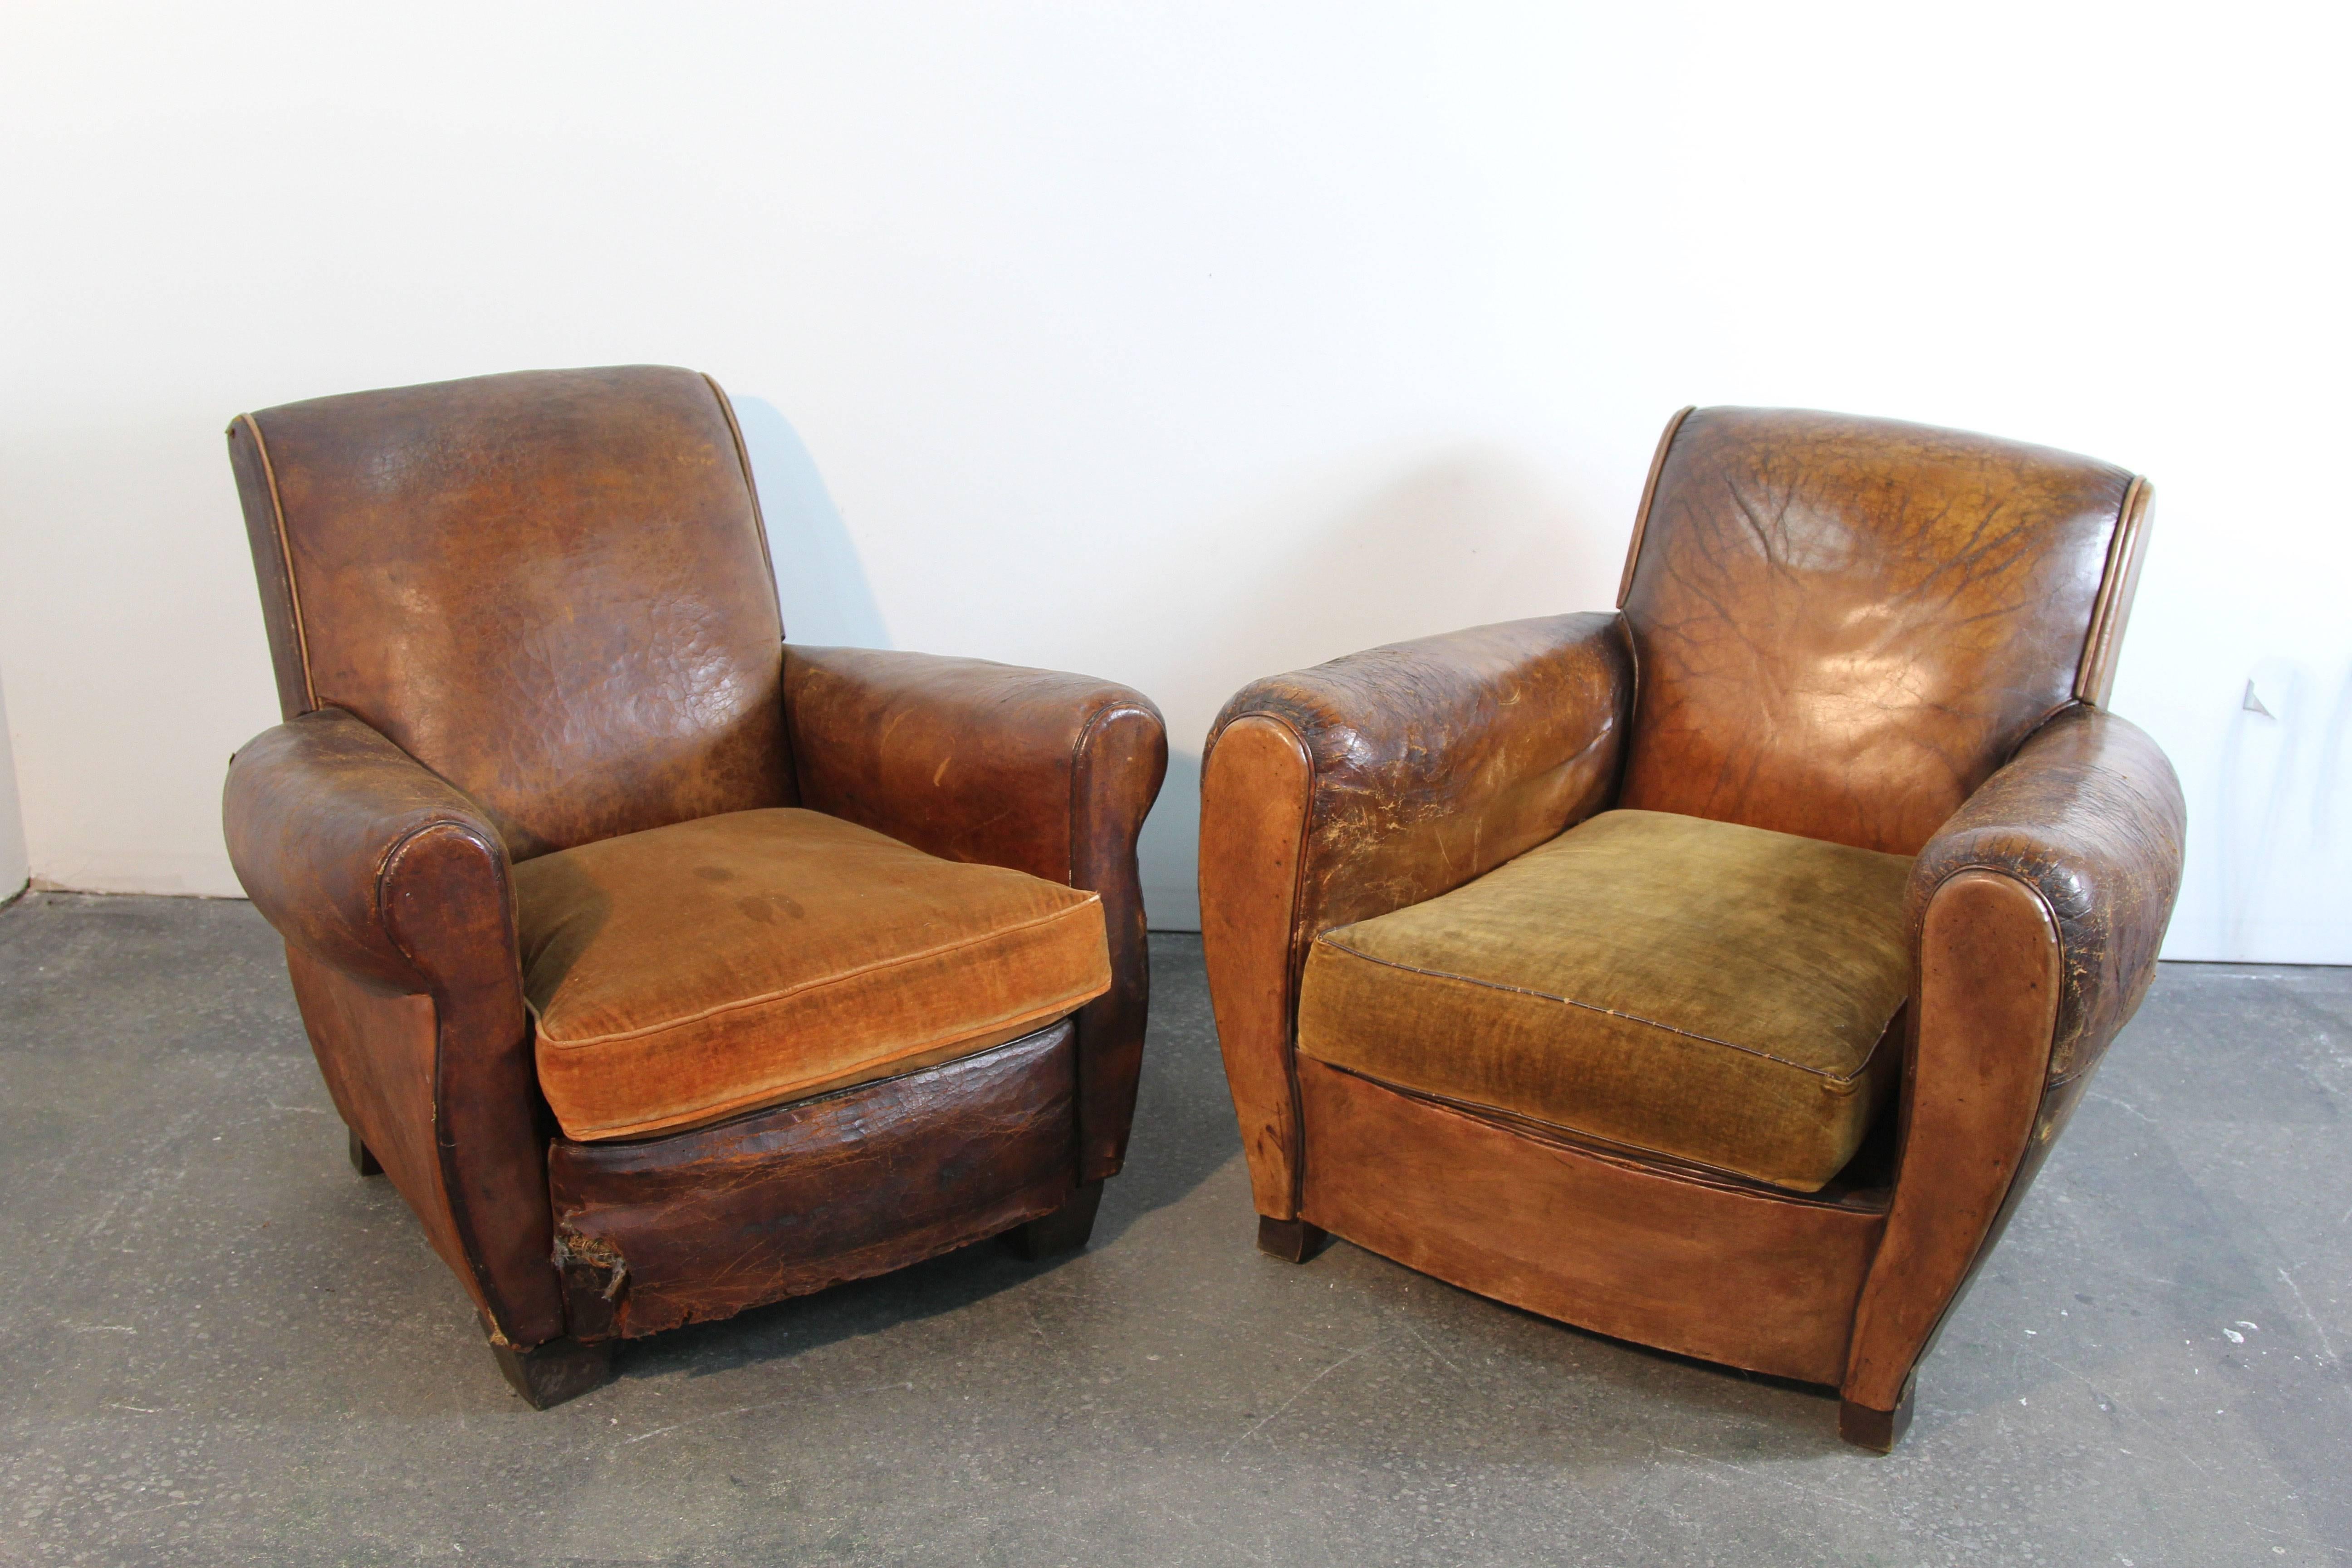 Mid-20th Century Pair of French Art Deco Leather Club Chairs